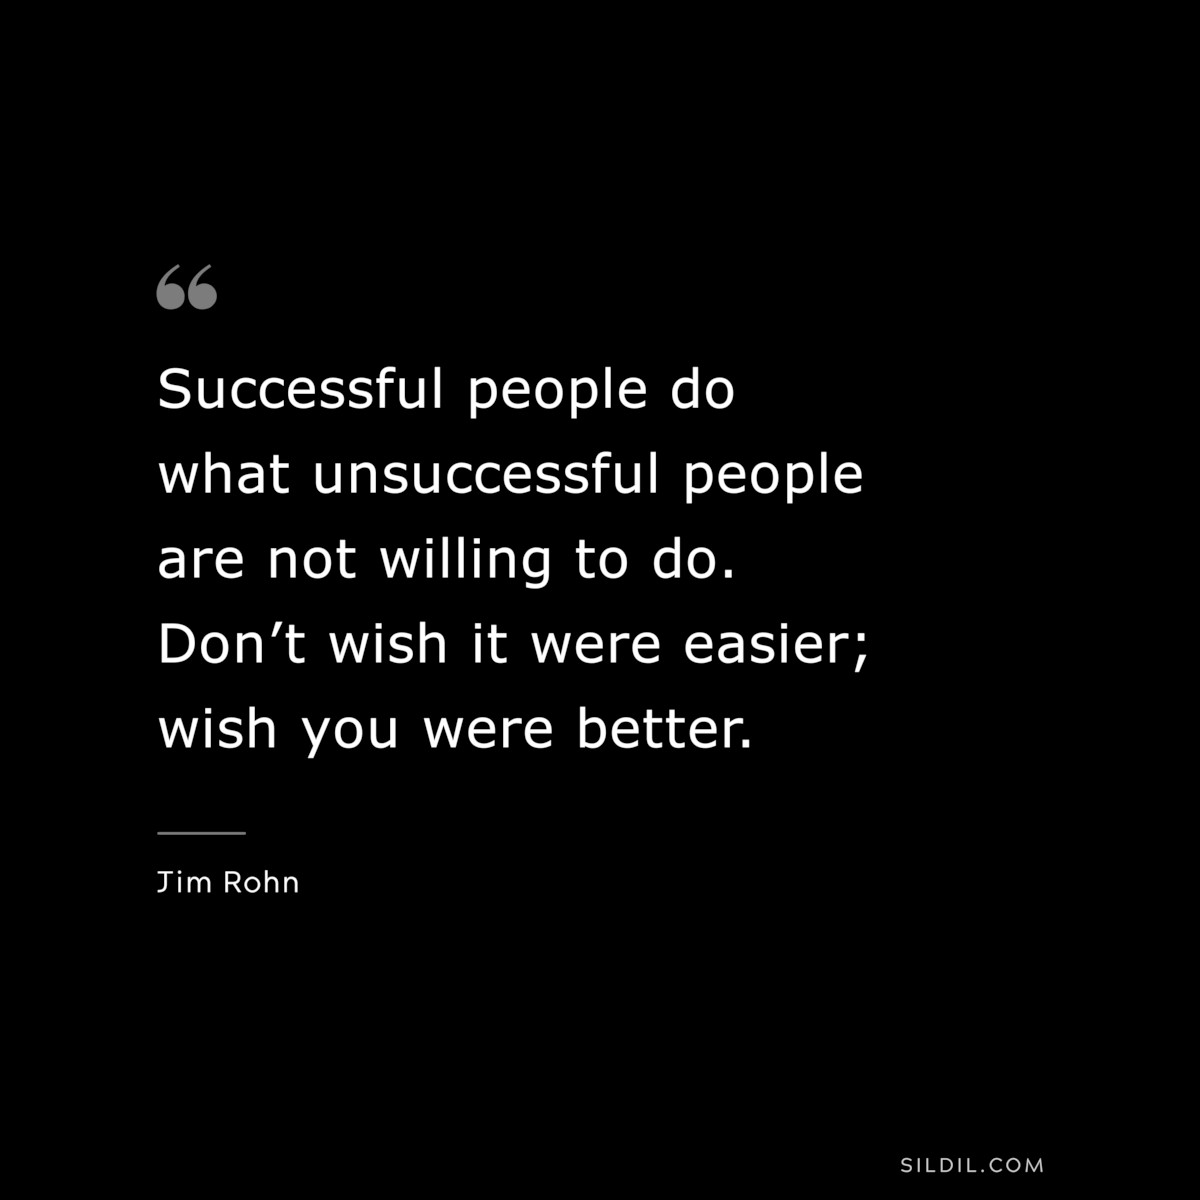 Successful people do what unsuccessful people are not willing to do. Don’t wish it were easier; wish you were better. ― Jim Rohn